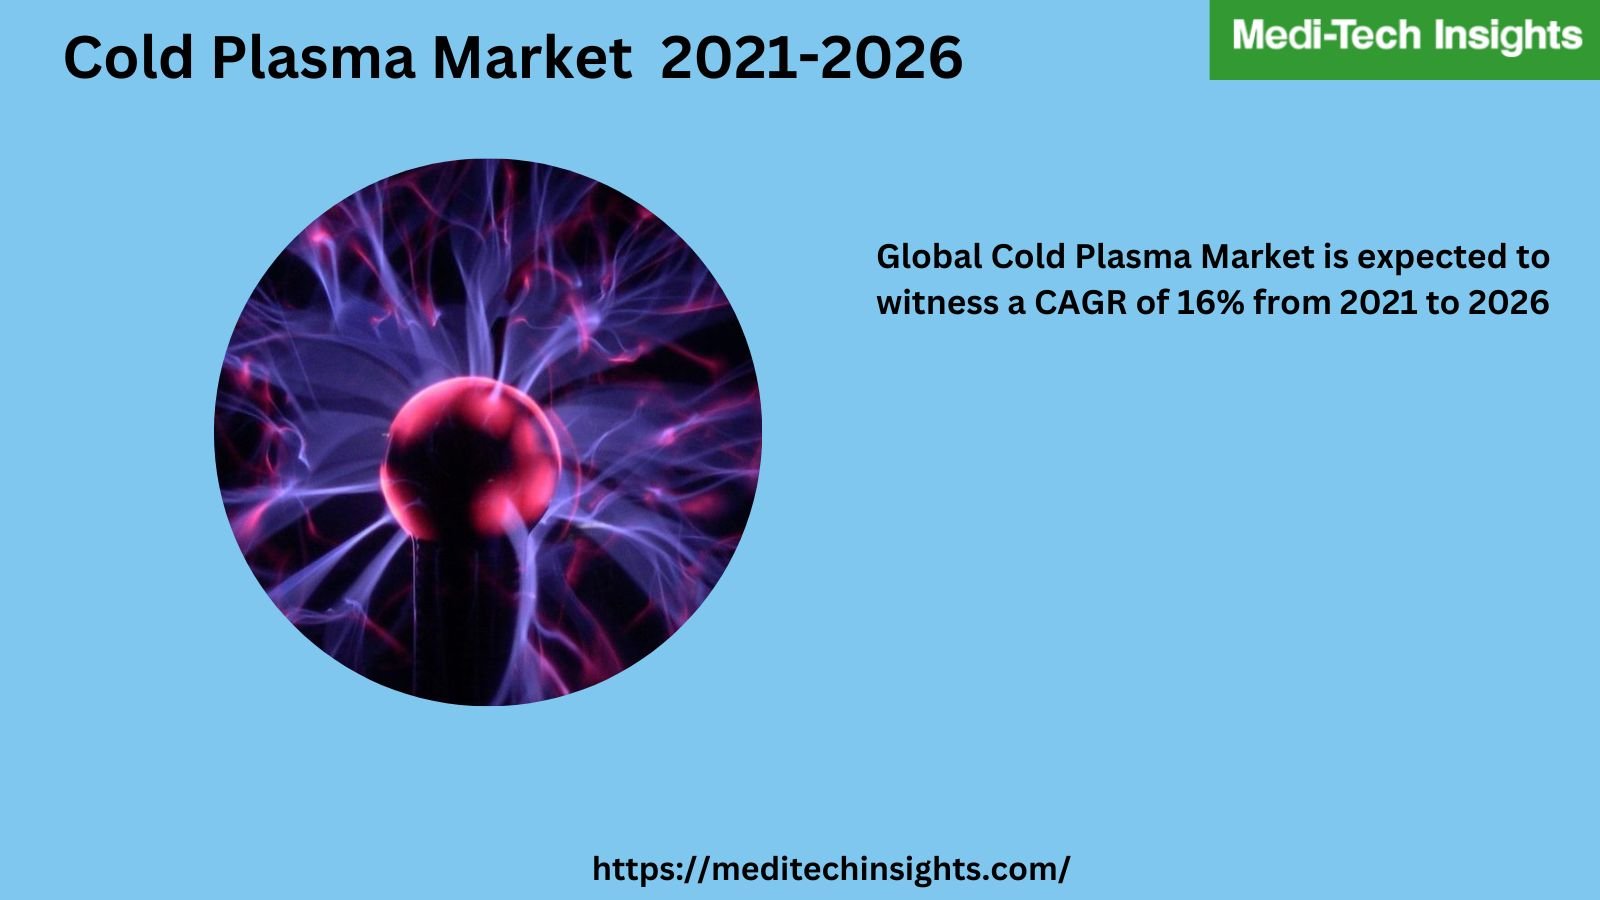 Cold Plasma Market is anticipated to grow at a healthy CAGR of ~16% During 2021-2026